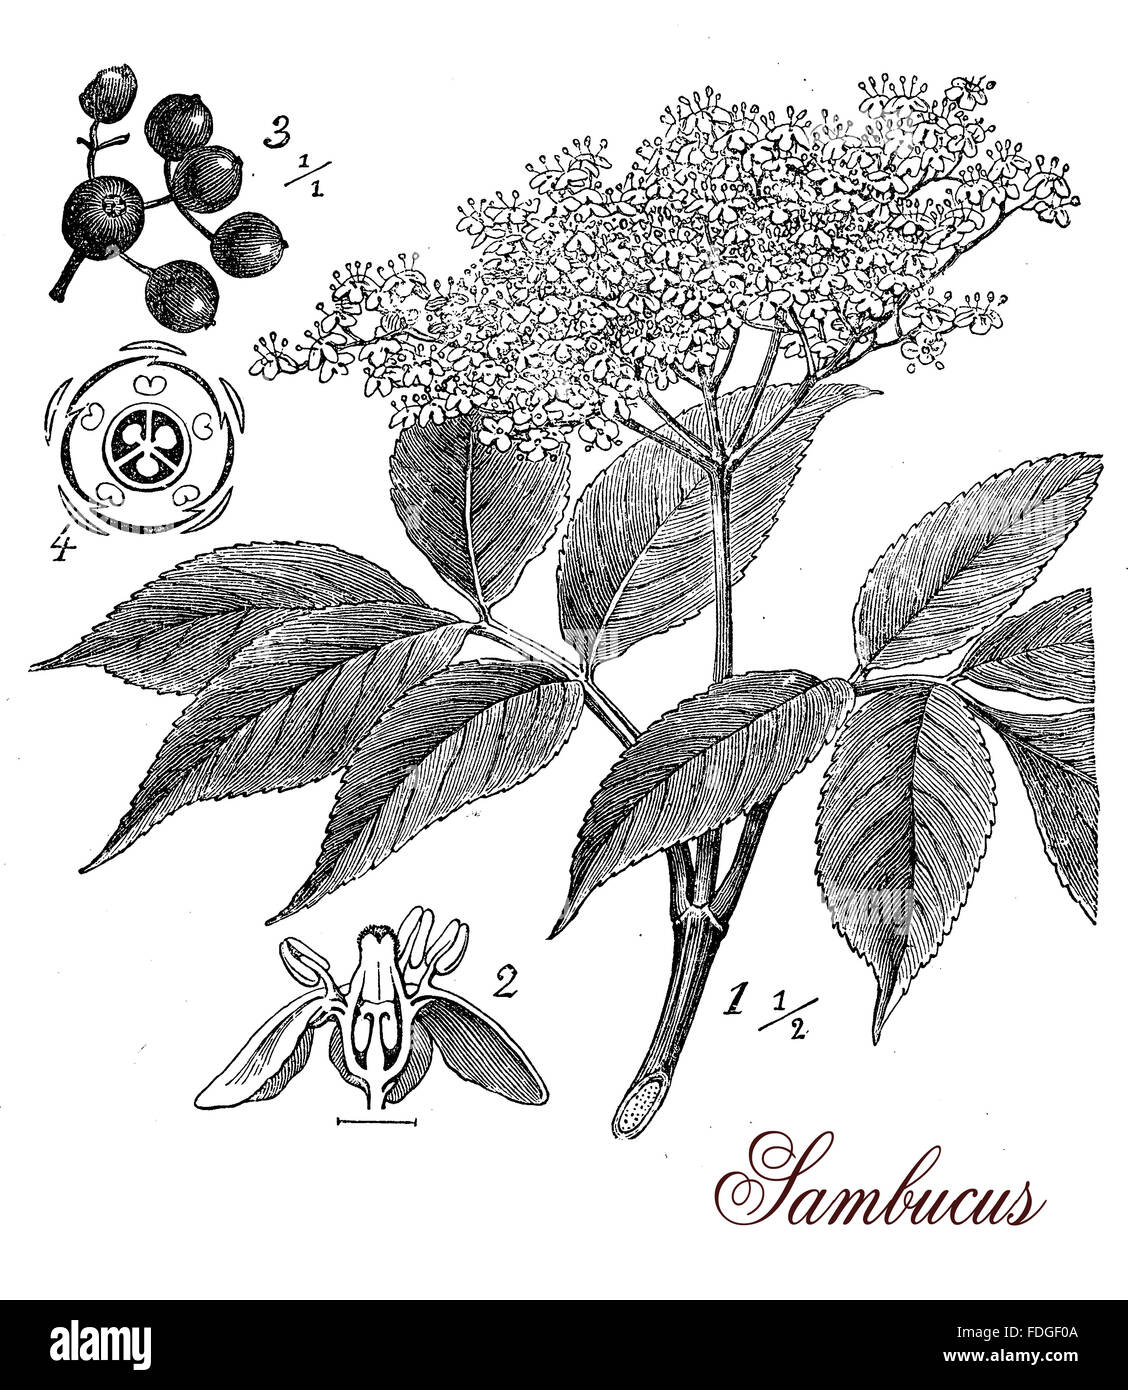 Vintage print describing Elderberry or sambucus plant botanical morphology:ornamental plant with white flowers, the berries are used medicinally or for juice, syrup and liqueur. Stock Photo